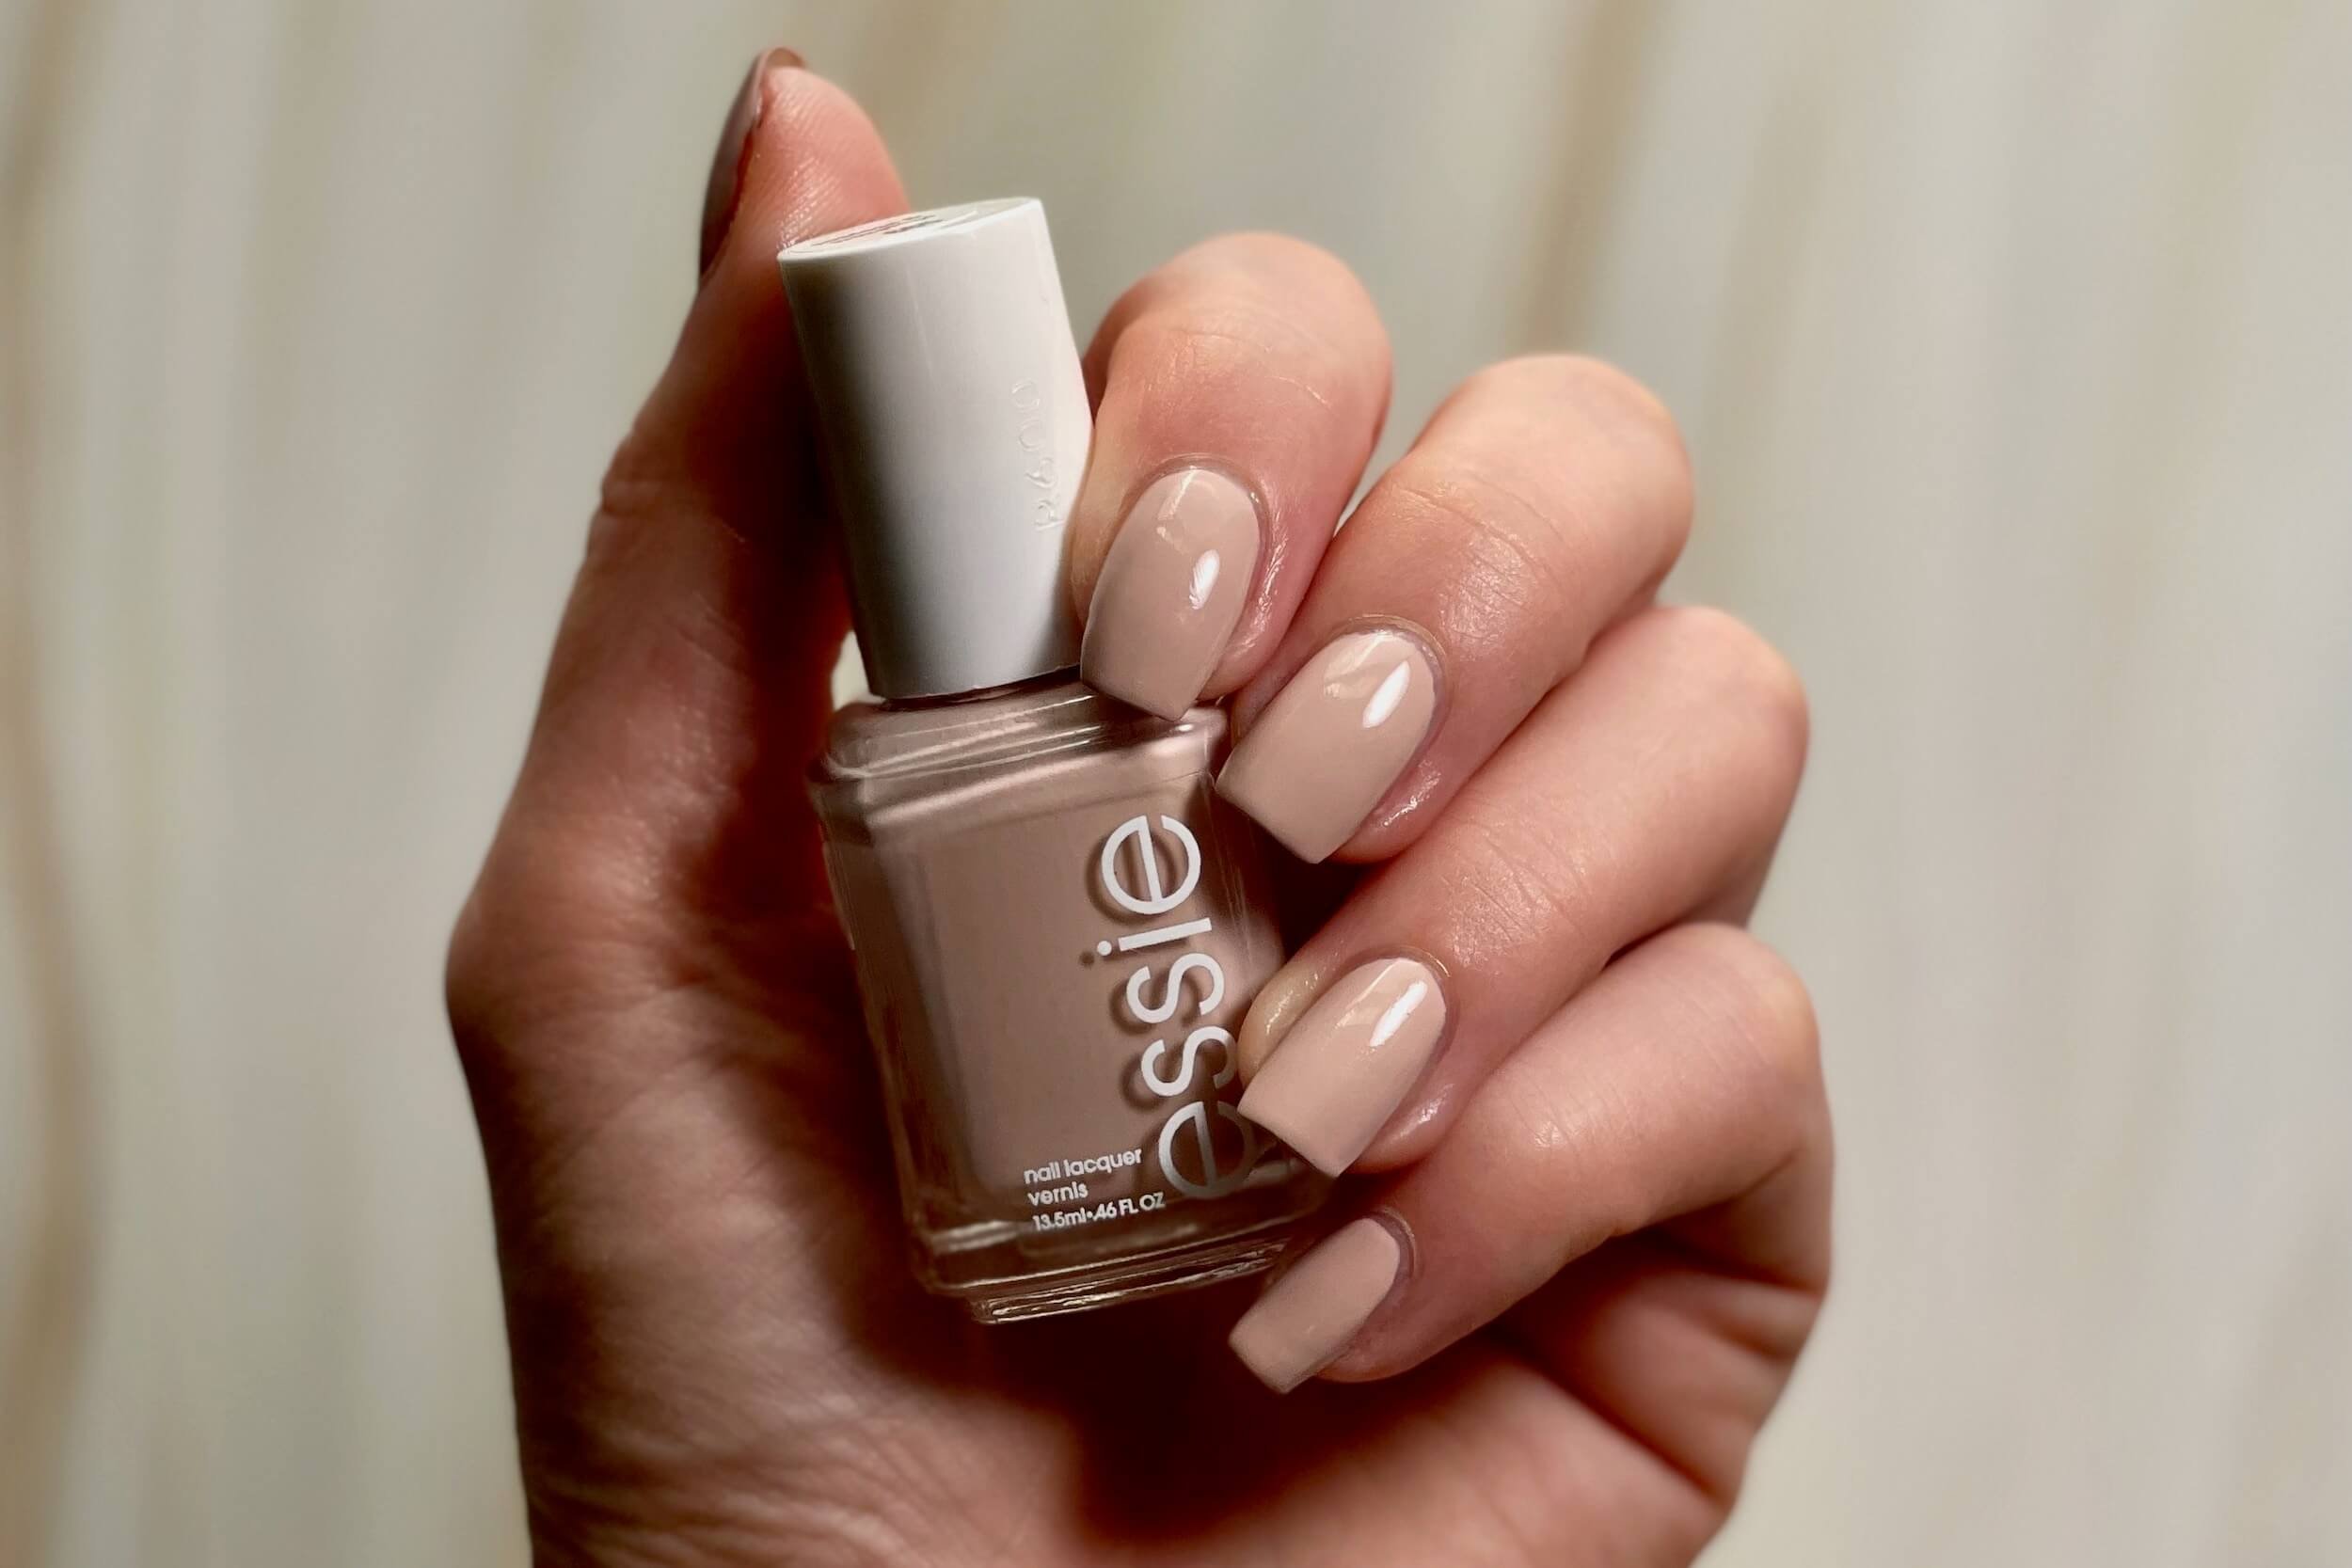 8. Essie Nail Polish in "Topless & Barefoot" - wide 6